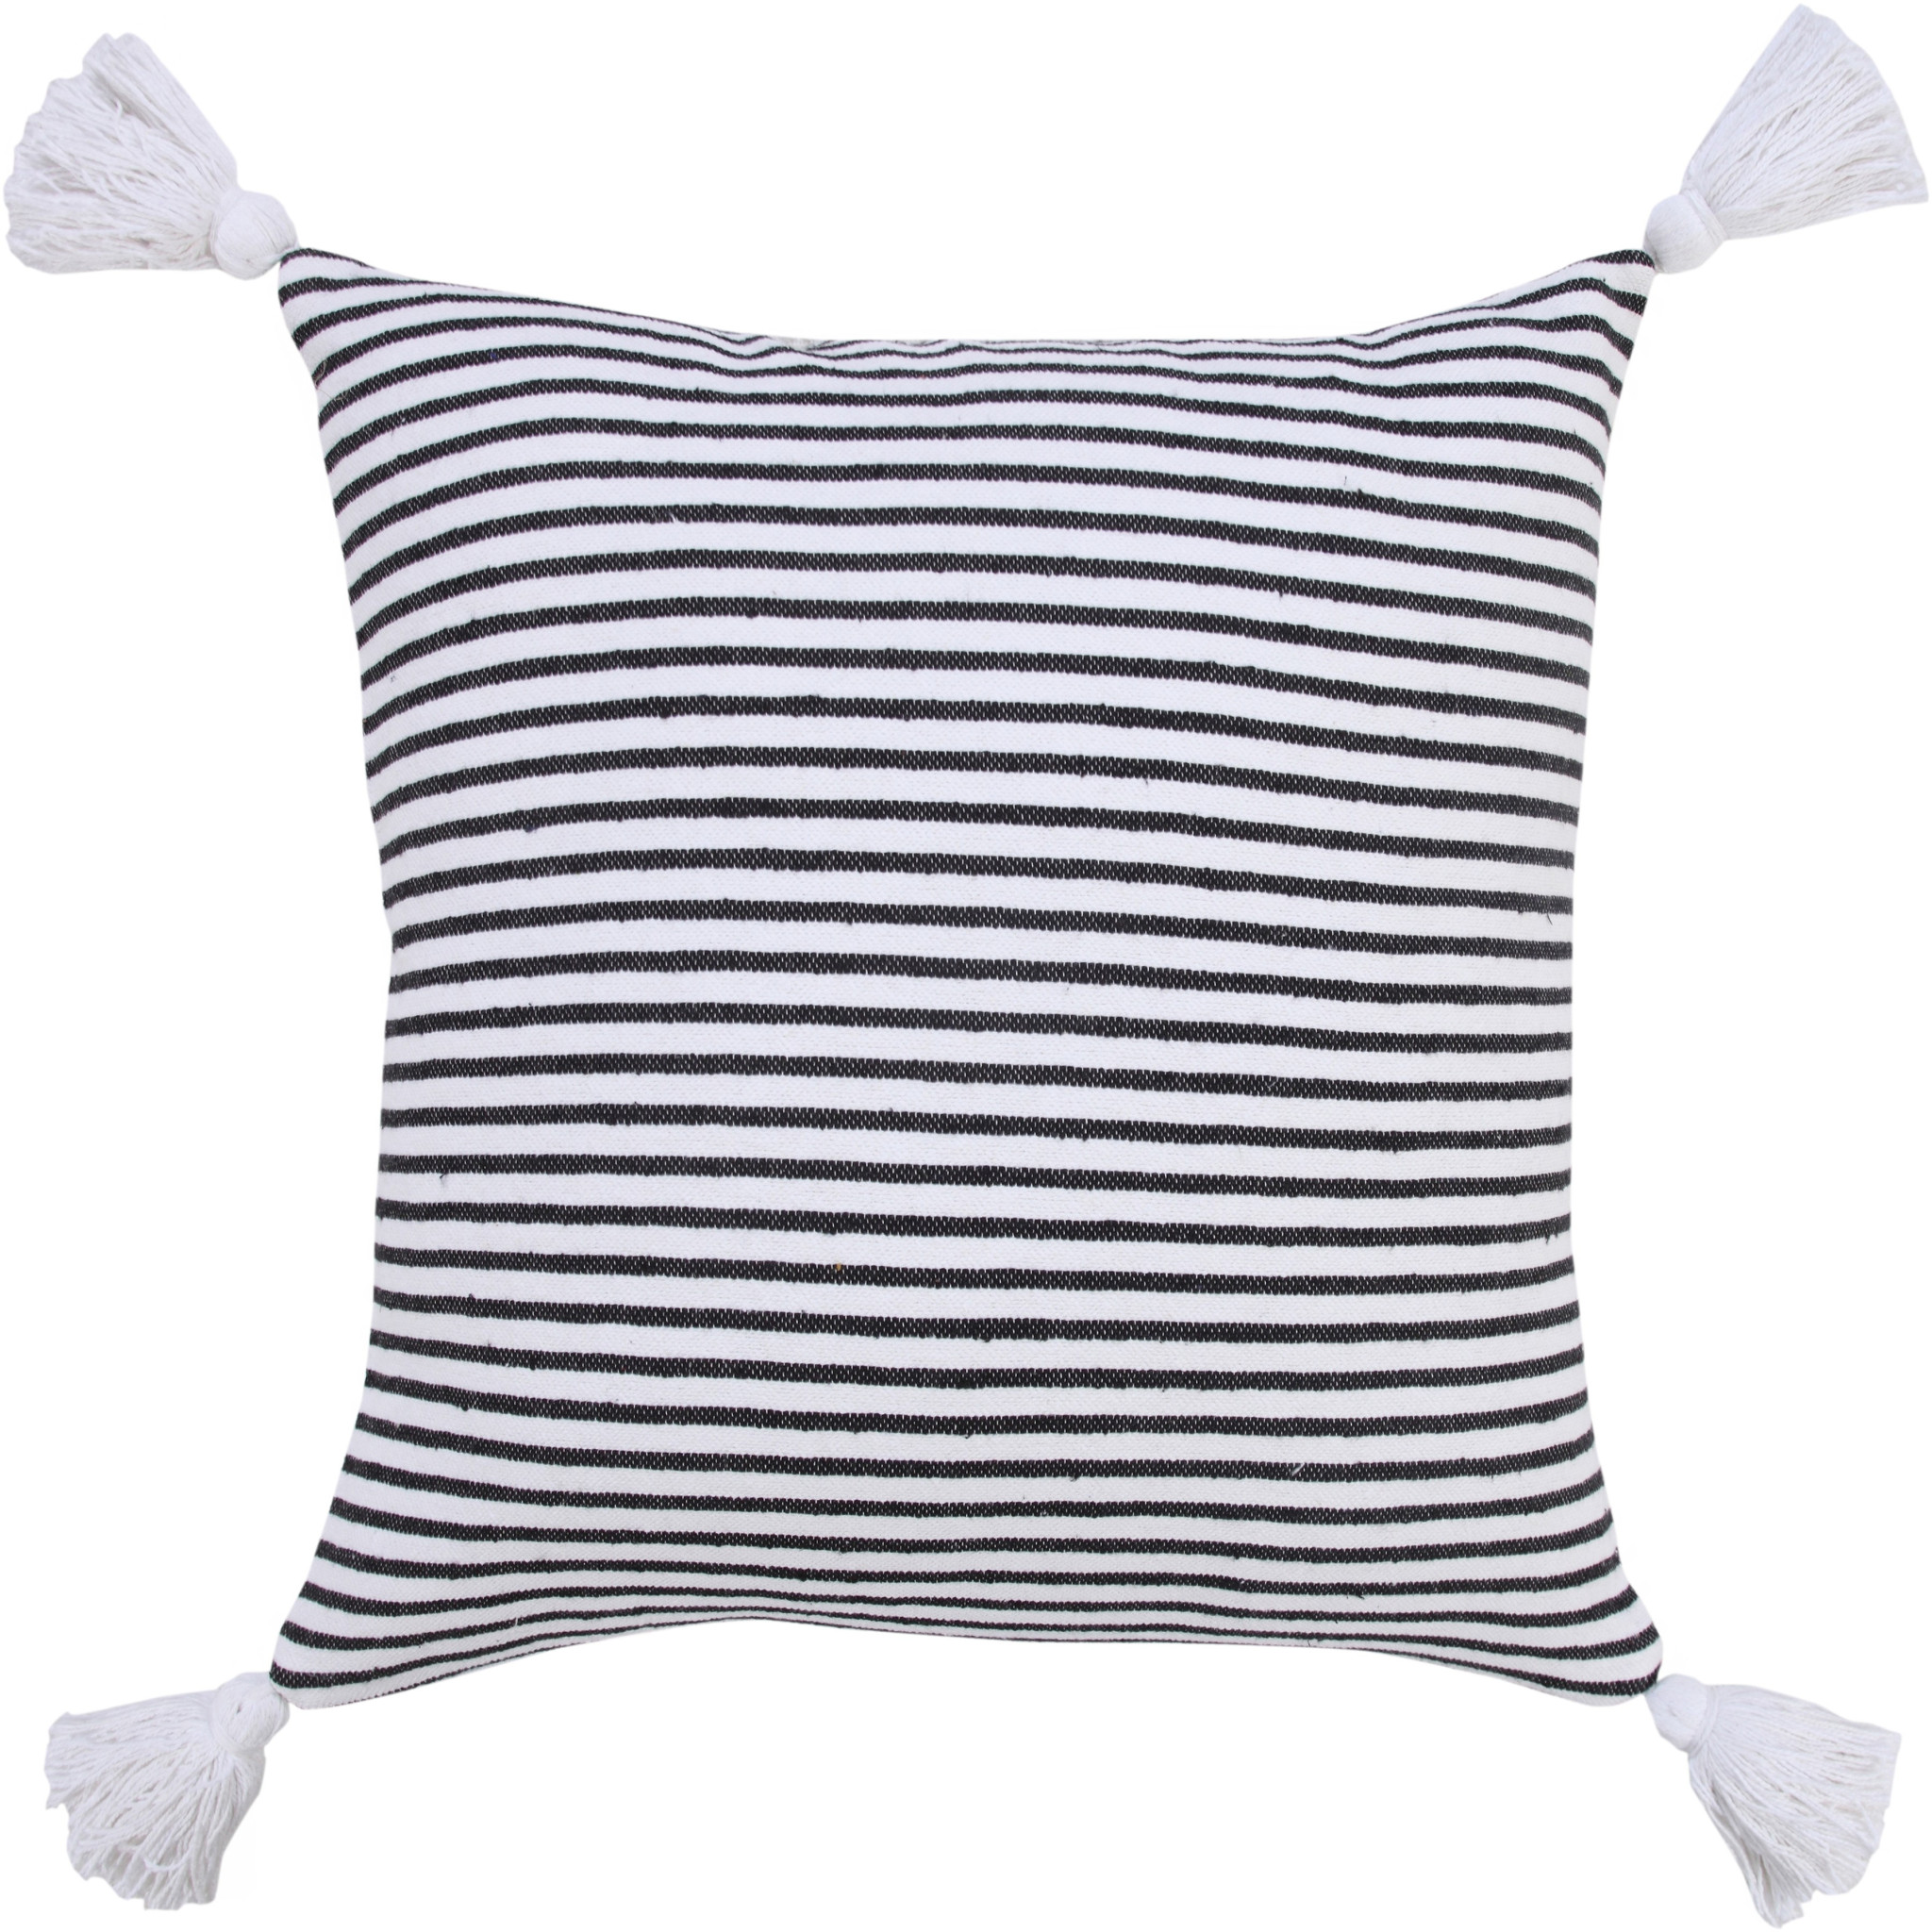 20" X 20" Black And White 100% Cotton Striped Zippered Pillow-516887-1